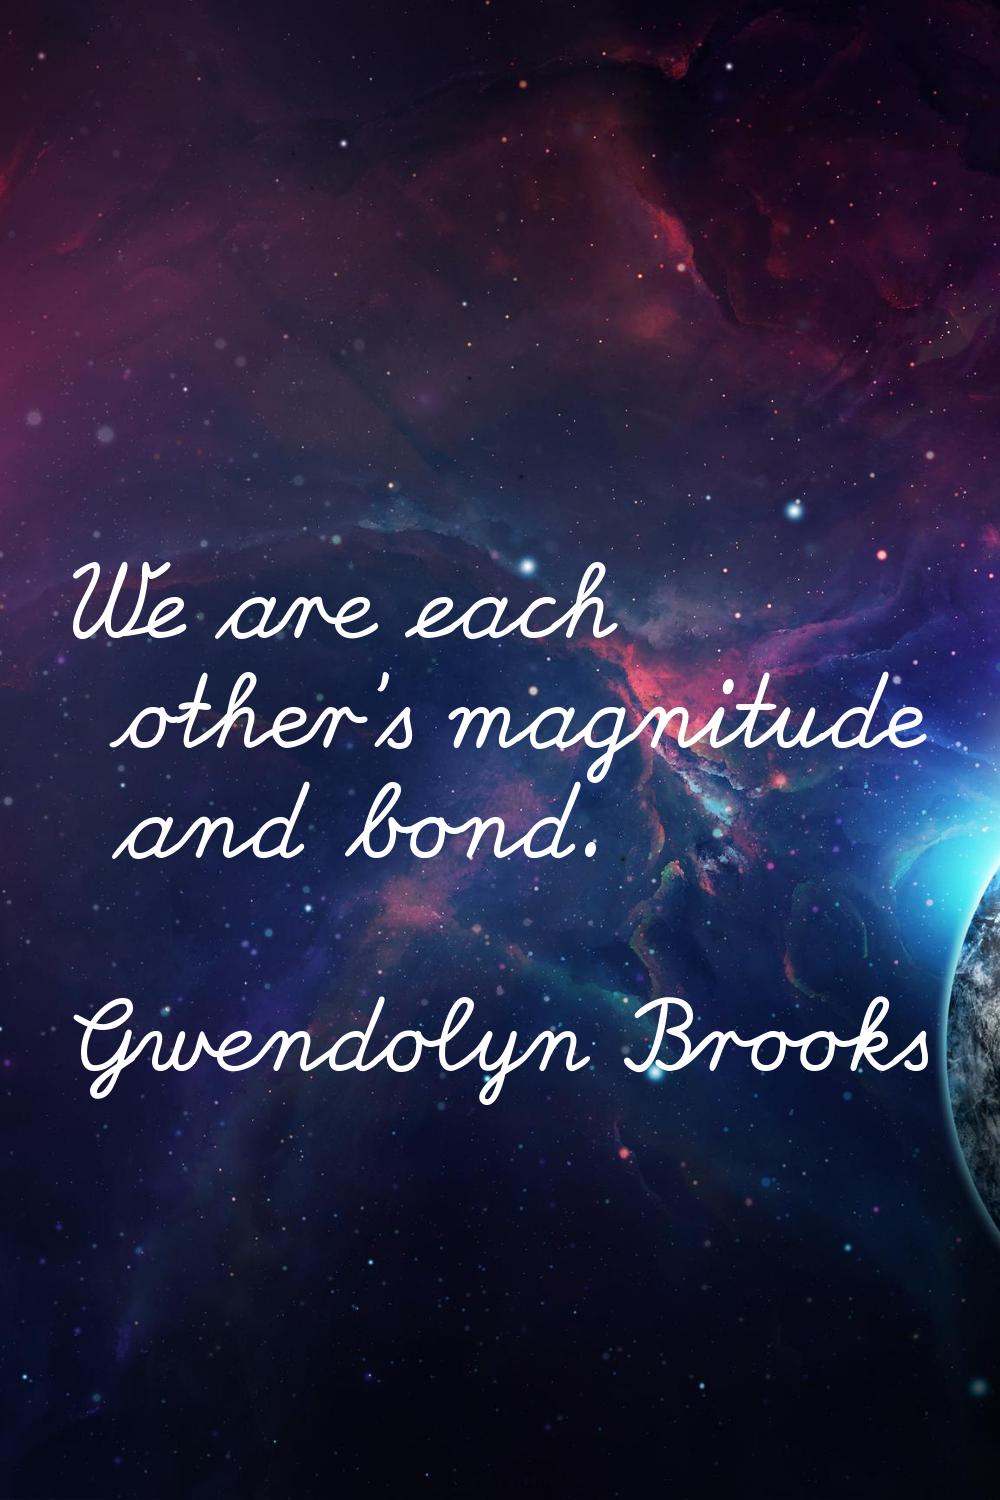 We are each other's magnitude and bond.